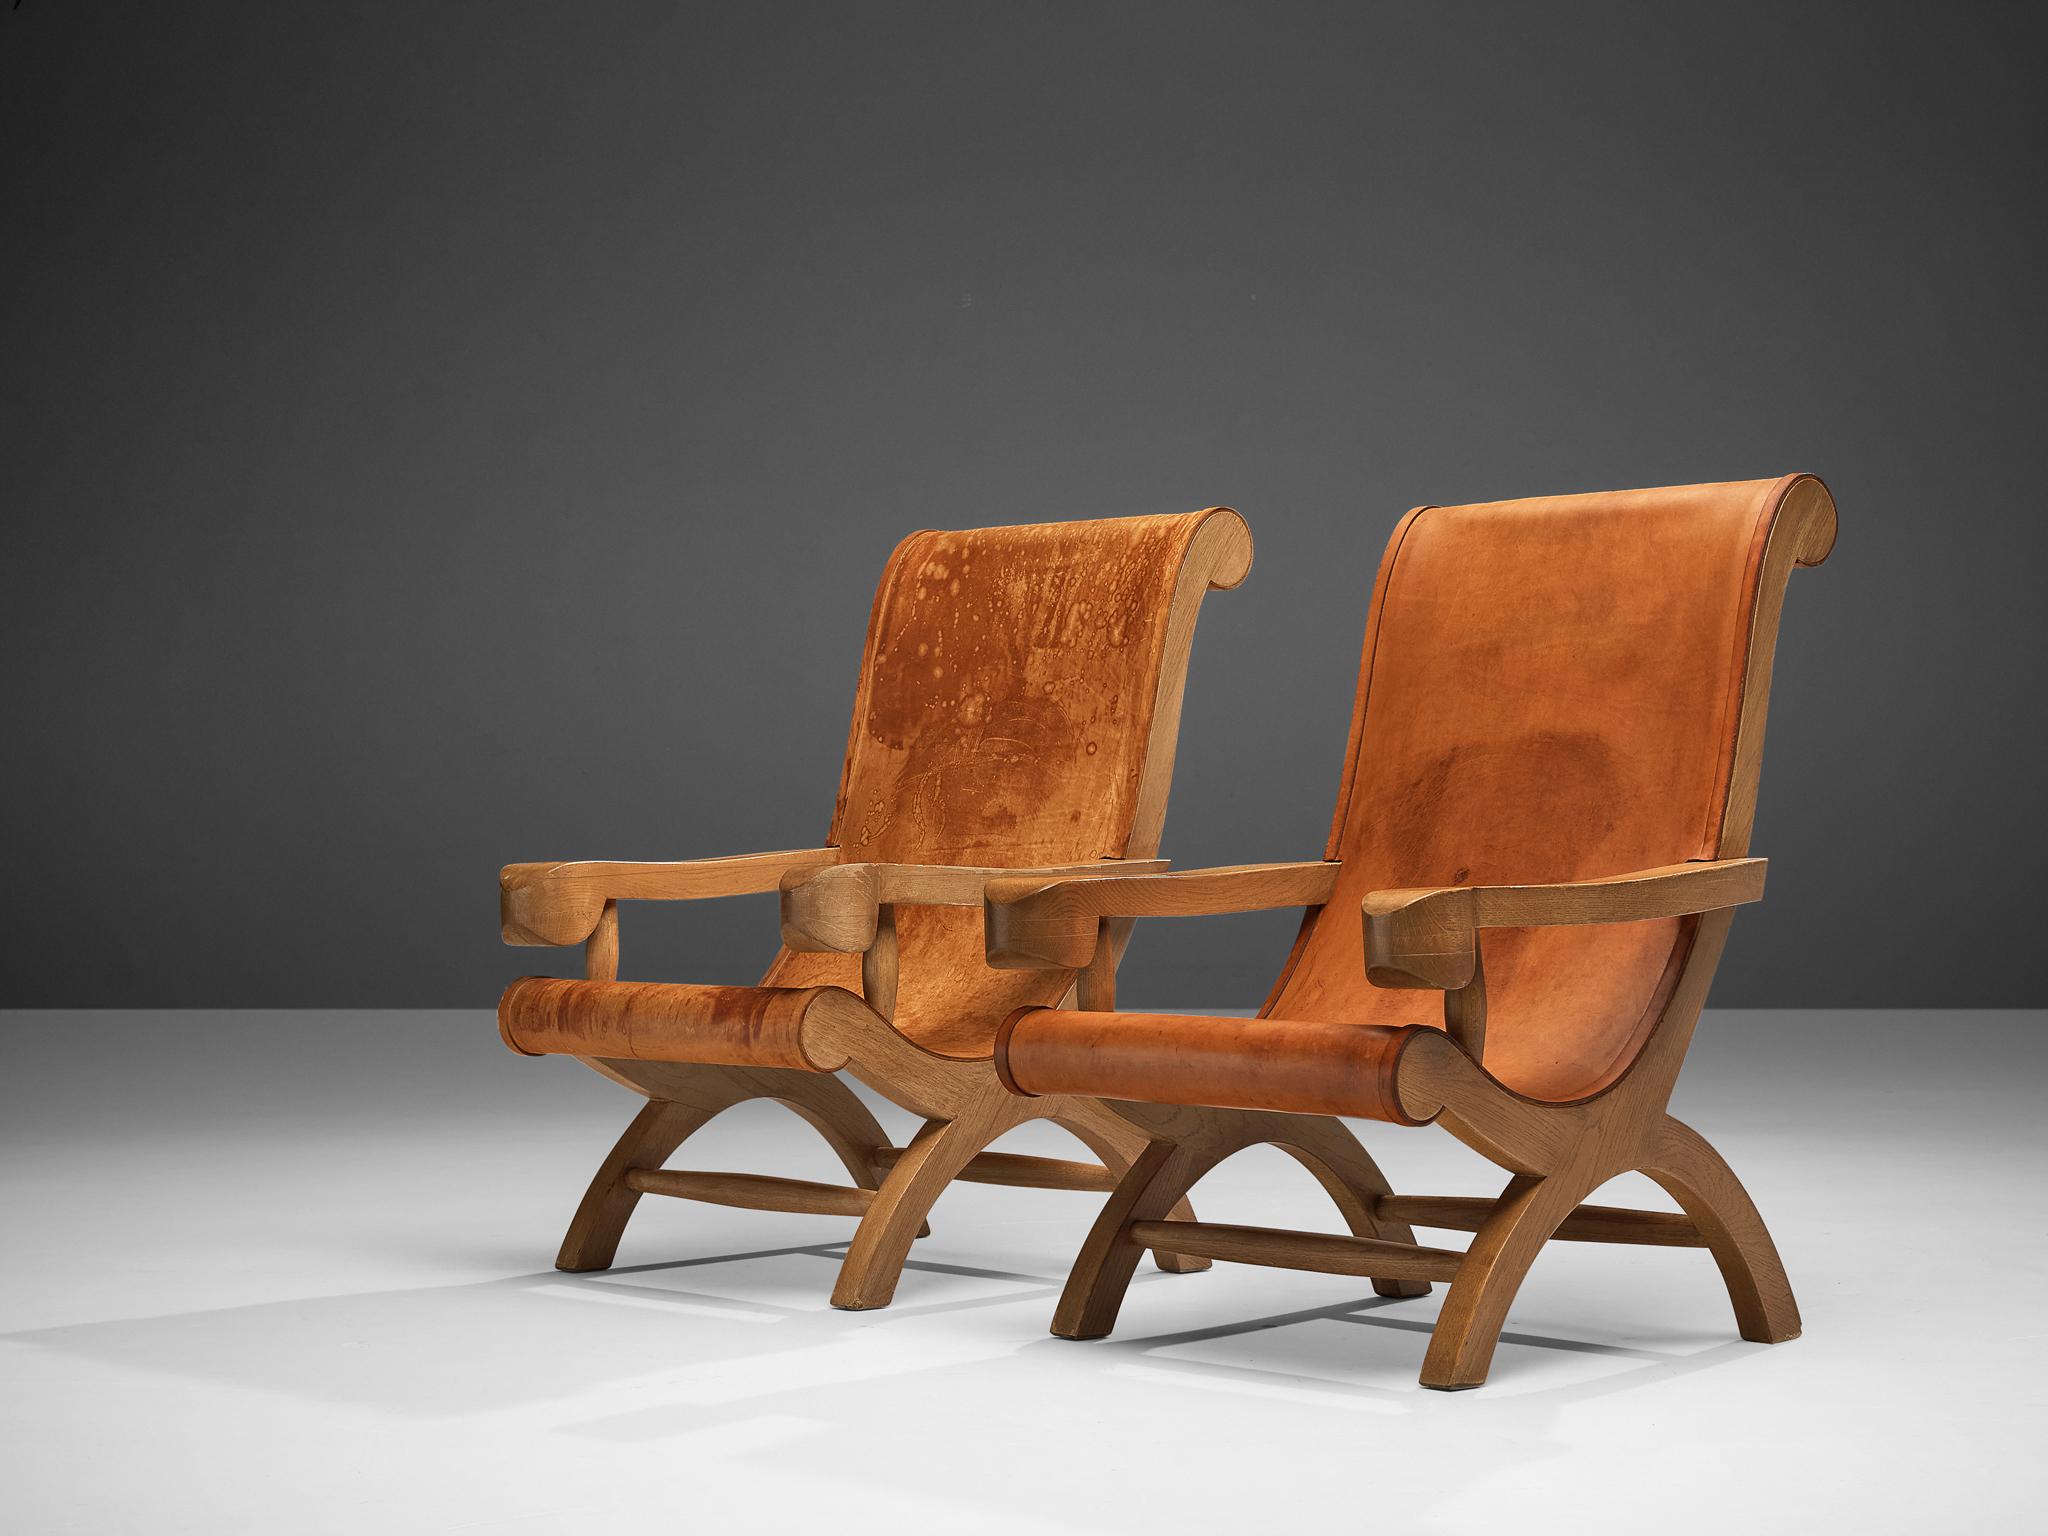 Clara Porset Lounge Chairs 'Butaque' in Original Patinated Leather For Sale 5